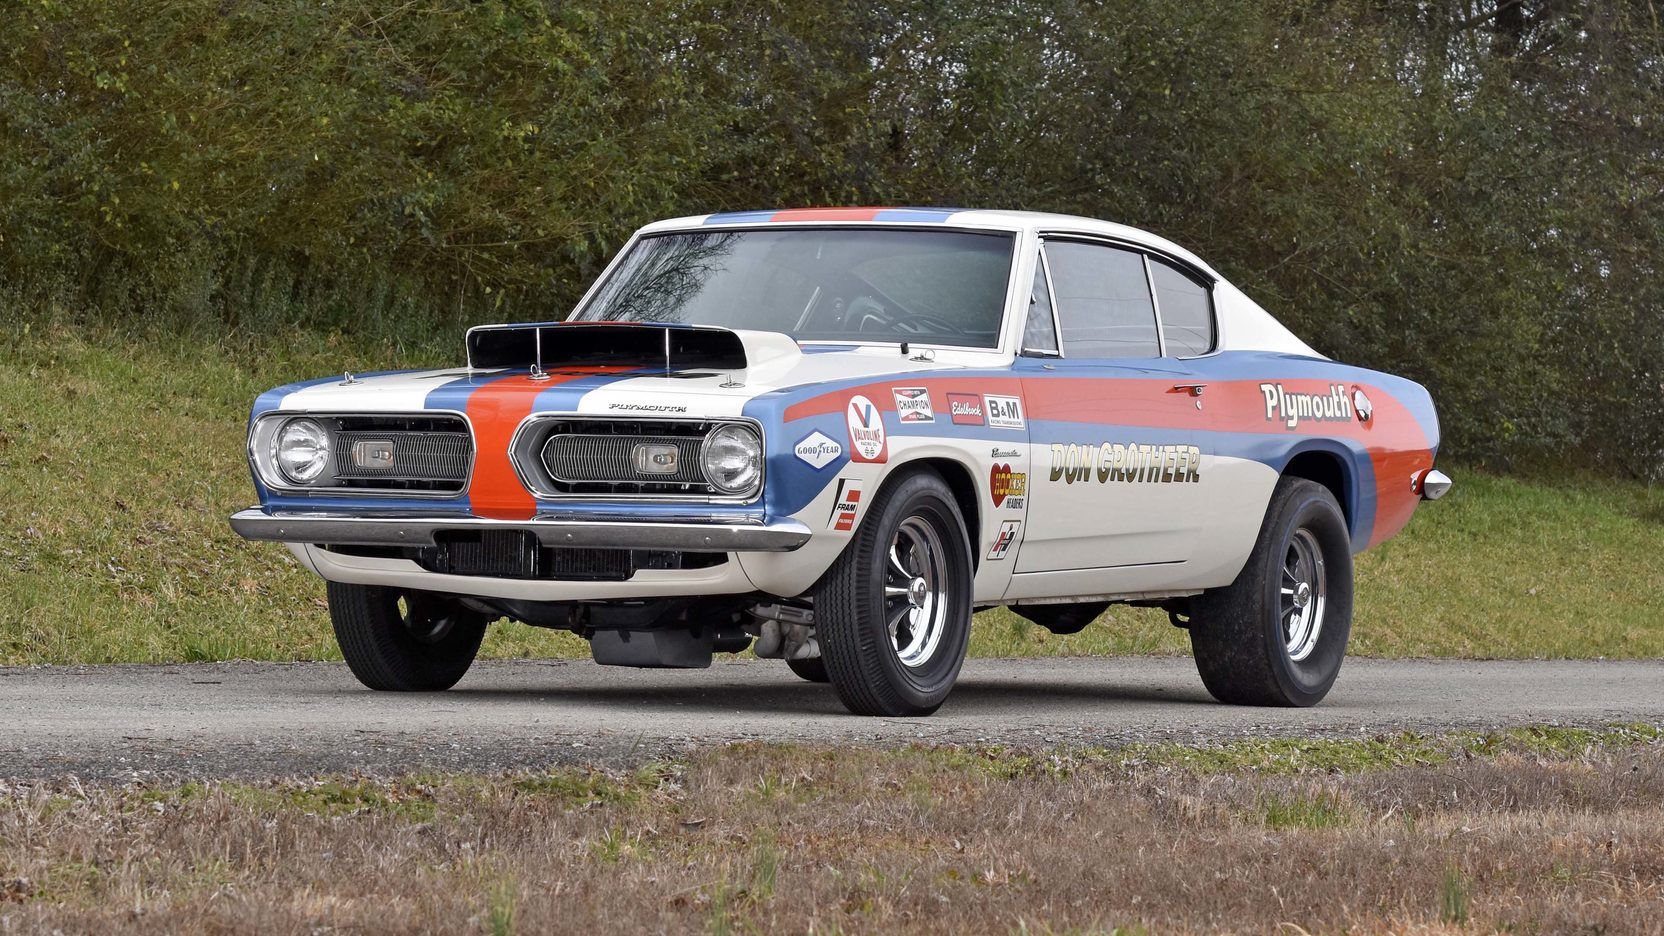 A parked 1968 Plymouth Barracuda B029 Super Stock